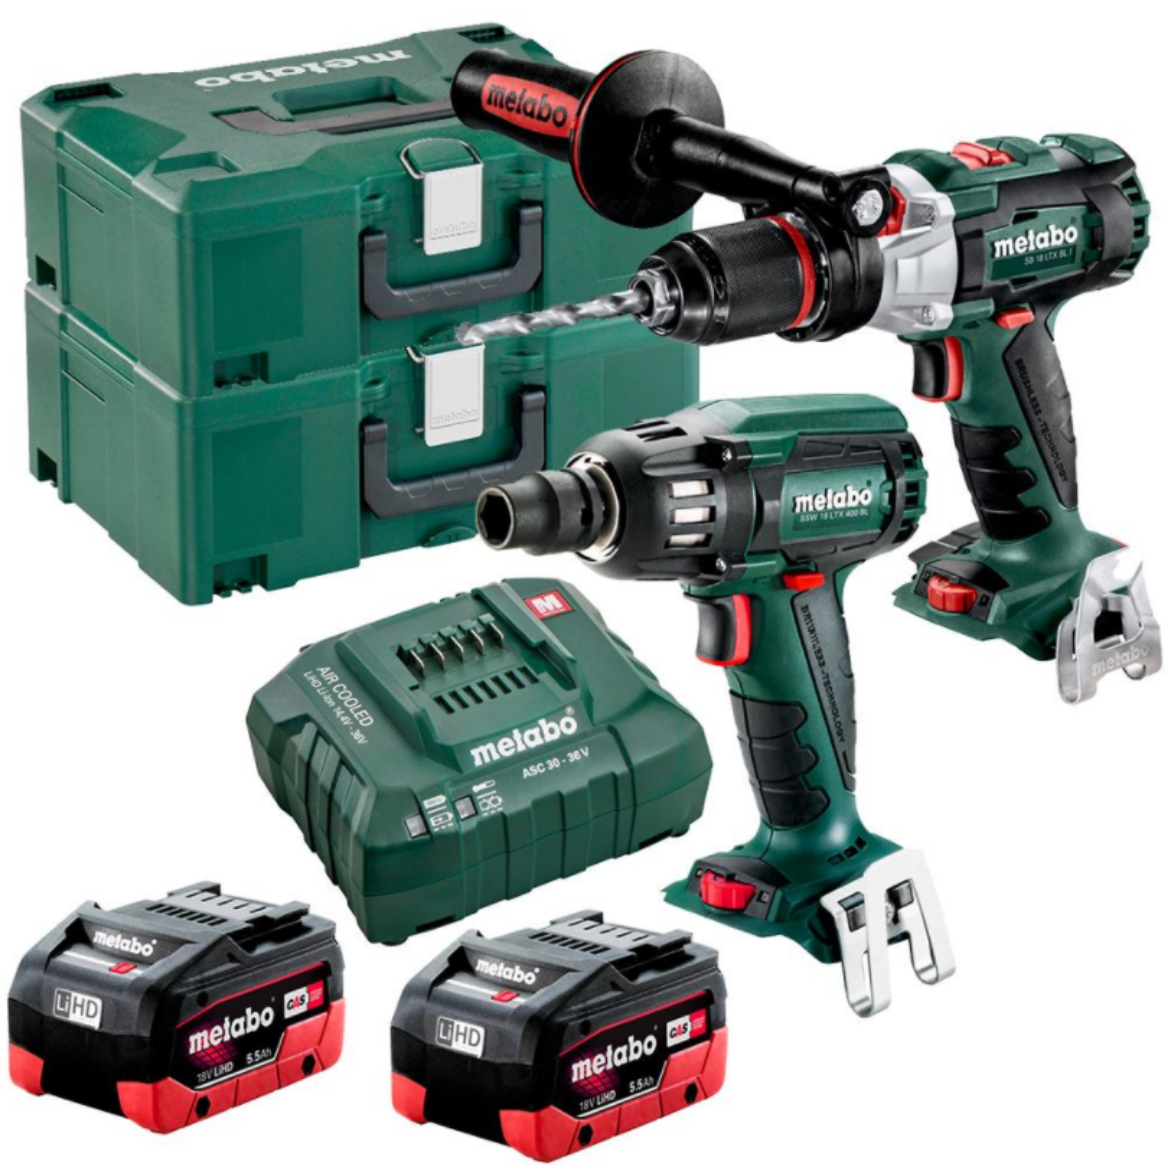 Picture of 18 V BRUSHLESS, HAMMER DRILL /SCREWDRIVER 120 NM +
18 V BRUSHLESS 1/2 IMPACT WRENCH 130-400 NM
(2 x 5.5 AH LIHD BATTERY PACKS, ASC 55 V AIR-COOLED CHARGER, 2 x METALOC II CASES)